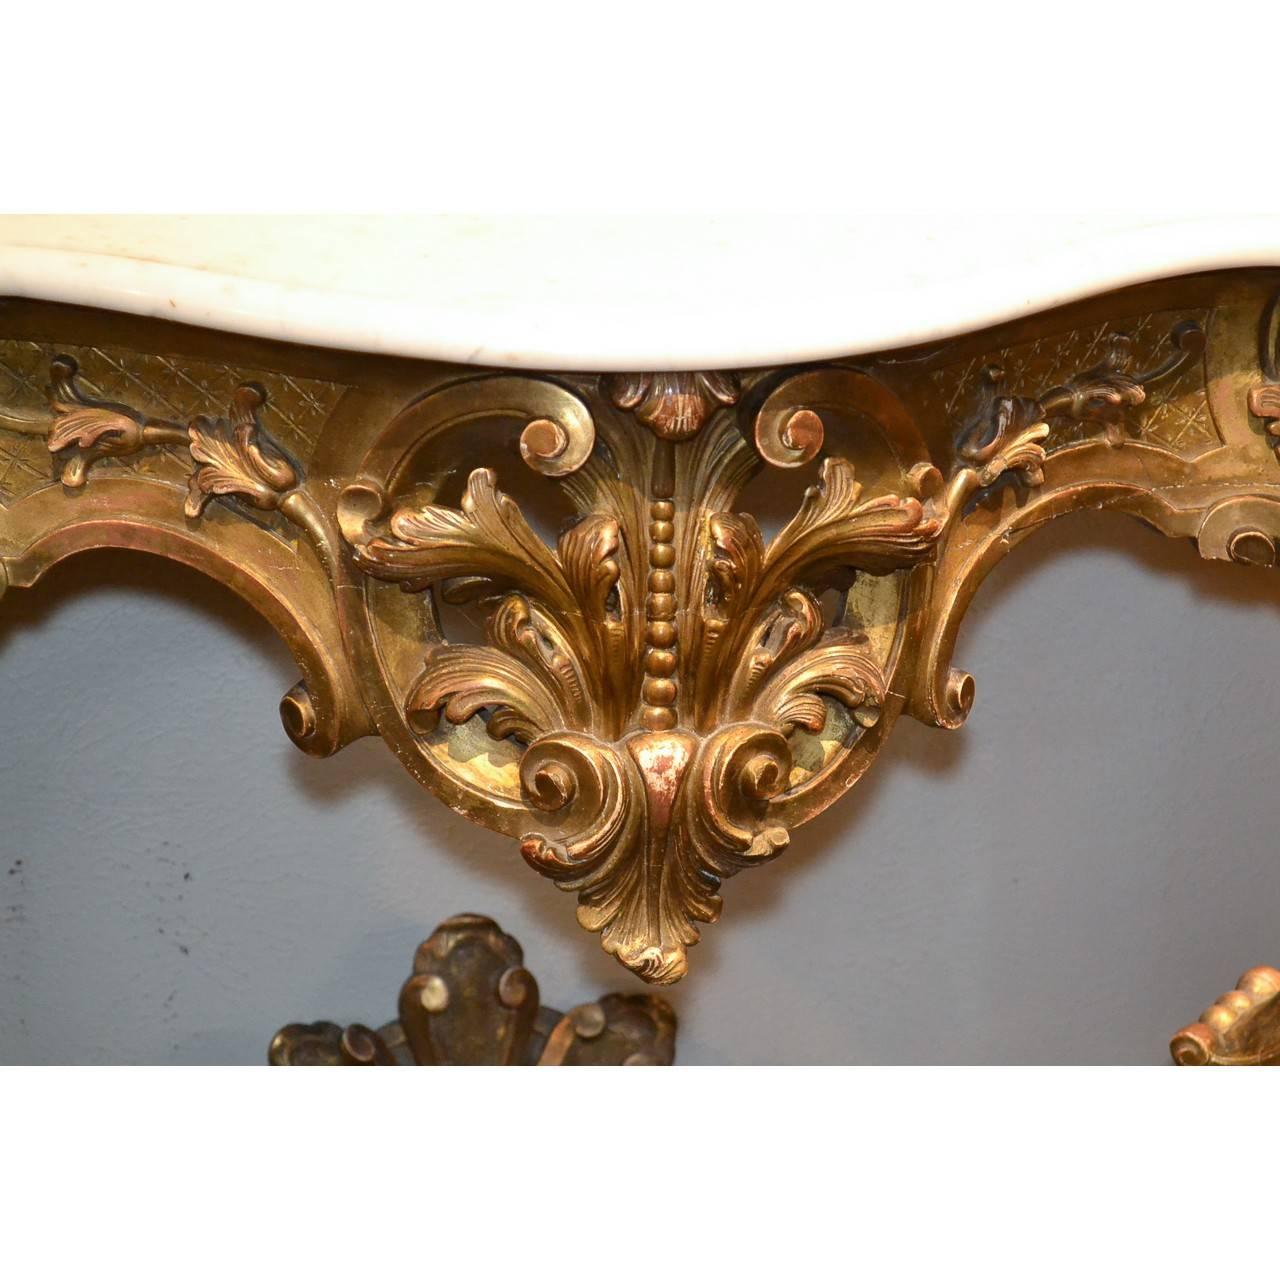 Phenomenal 19th century French carved giltwood and Carrara marble serpentine fronted console in the Rococo fashion, elaborately decorated overall with leaf sprays and scrolling foliage, circa 1860.

Size: 45.5